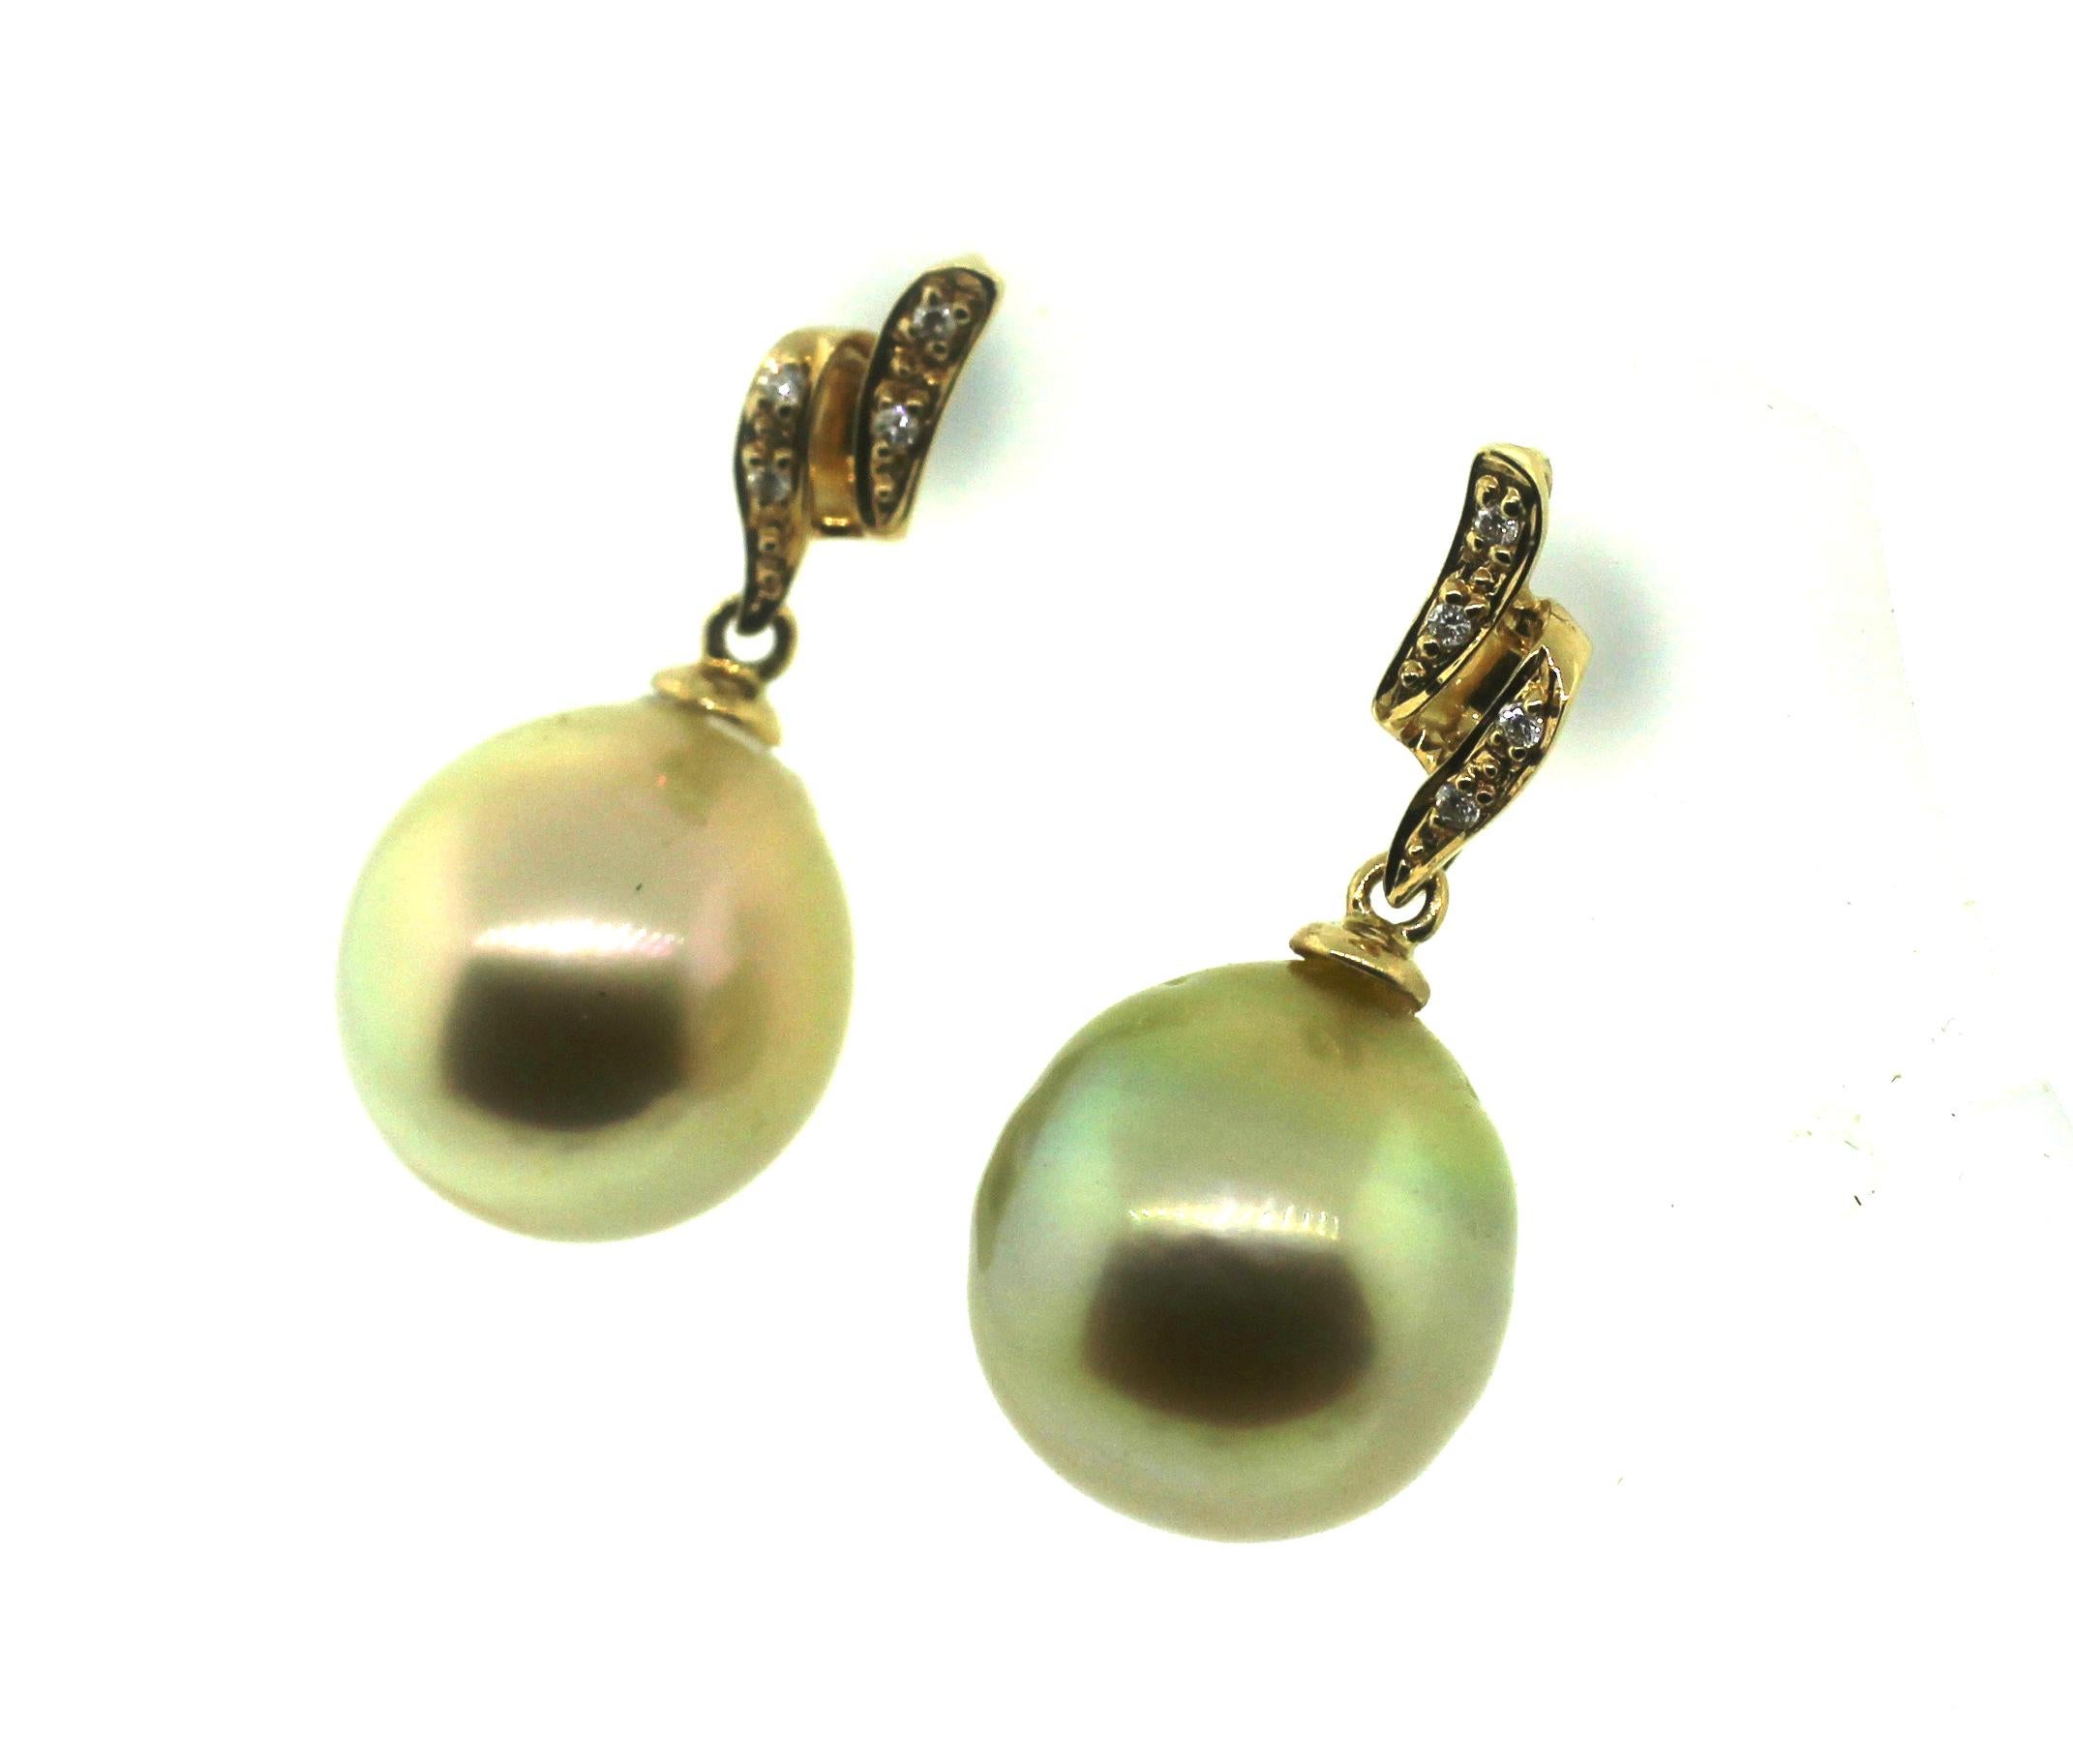 Hakimoto By Jewel Of Ocean
18K Yellow Gold and Diamond 
Fancy Natural Color Golden South Sea Coultured Pearl Earrings.
Total item weight 6.3 grams
Round Brilliant Diamonds
12 mm Fancy Natural color Golden South Sea Cultured Pearls
18K Yellow Gold